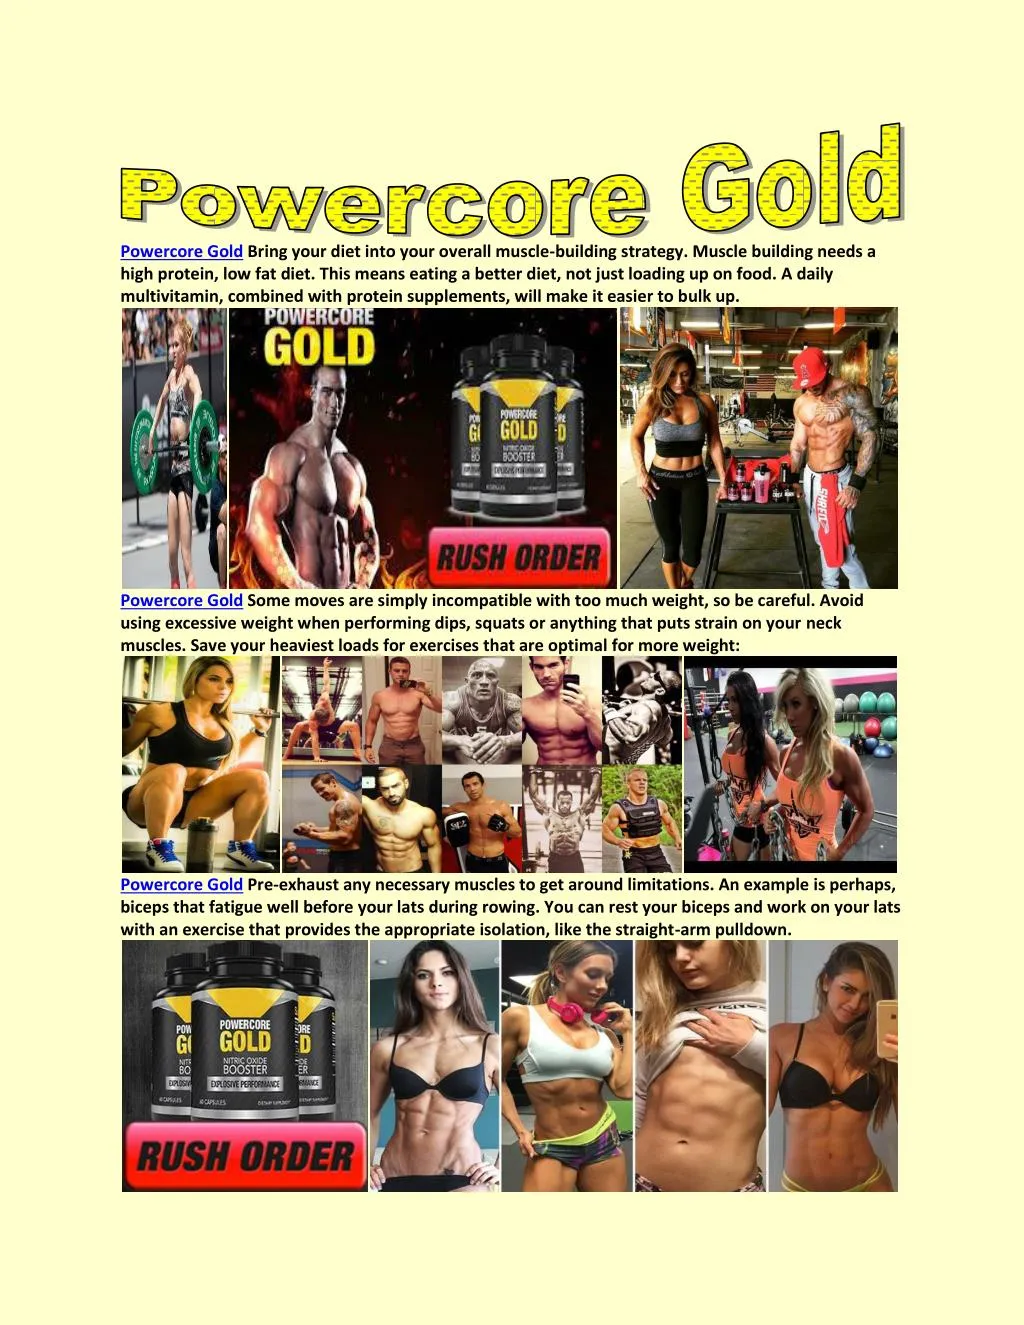 powercore gold bring your diet into your overall